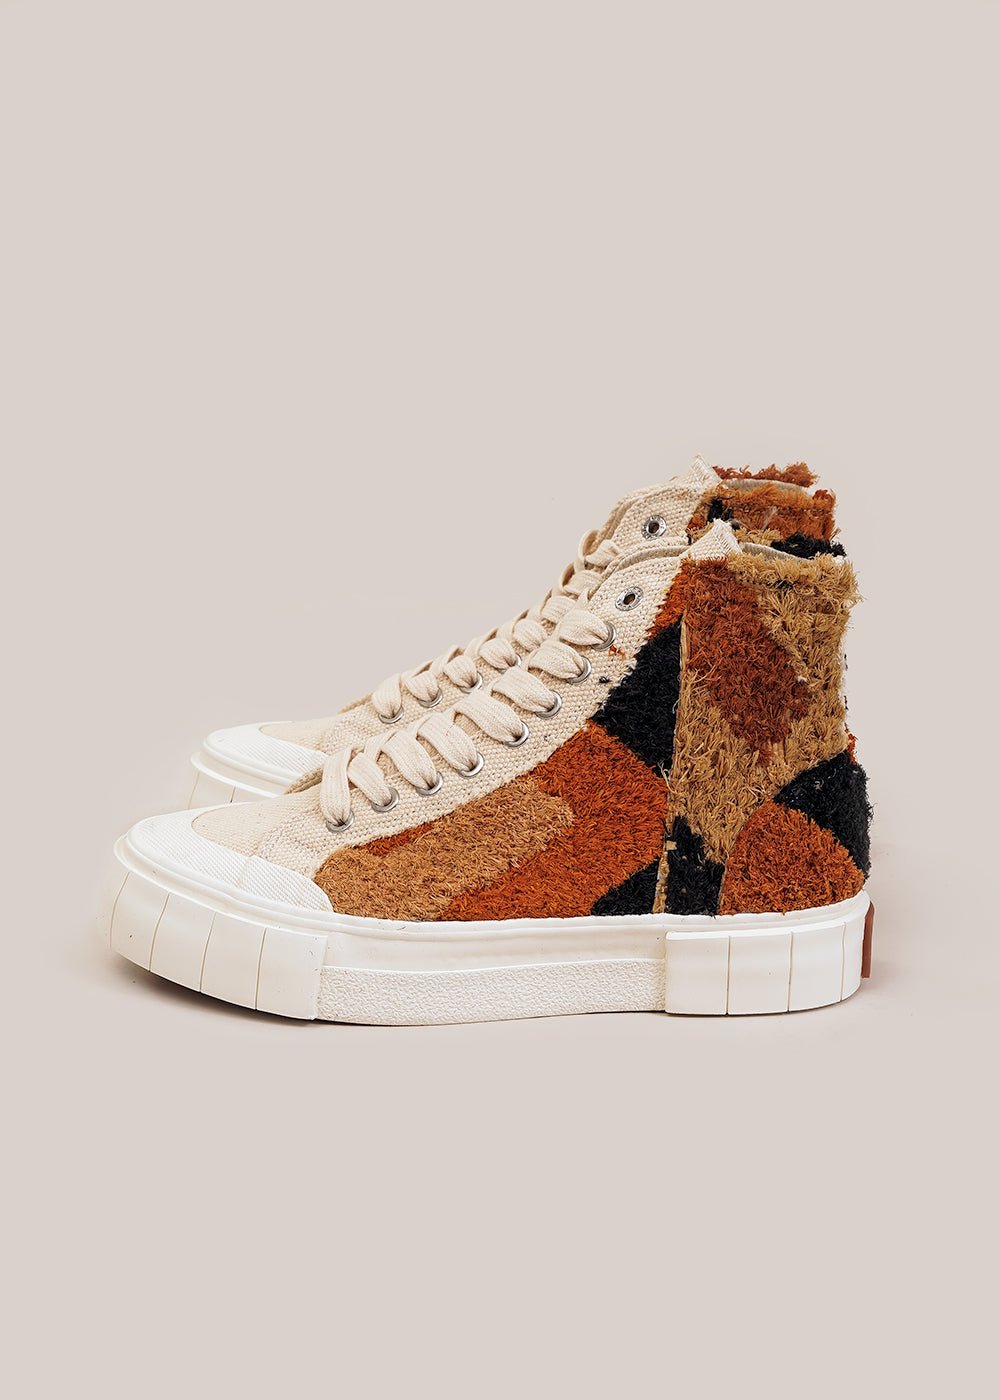 GOOD NEWS Oatmeal Palm Moroccan Sneakers - New Classics Studios Sustainable Ethical Fashion Canada